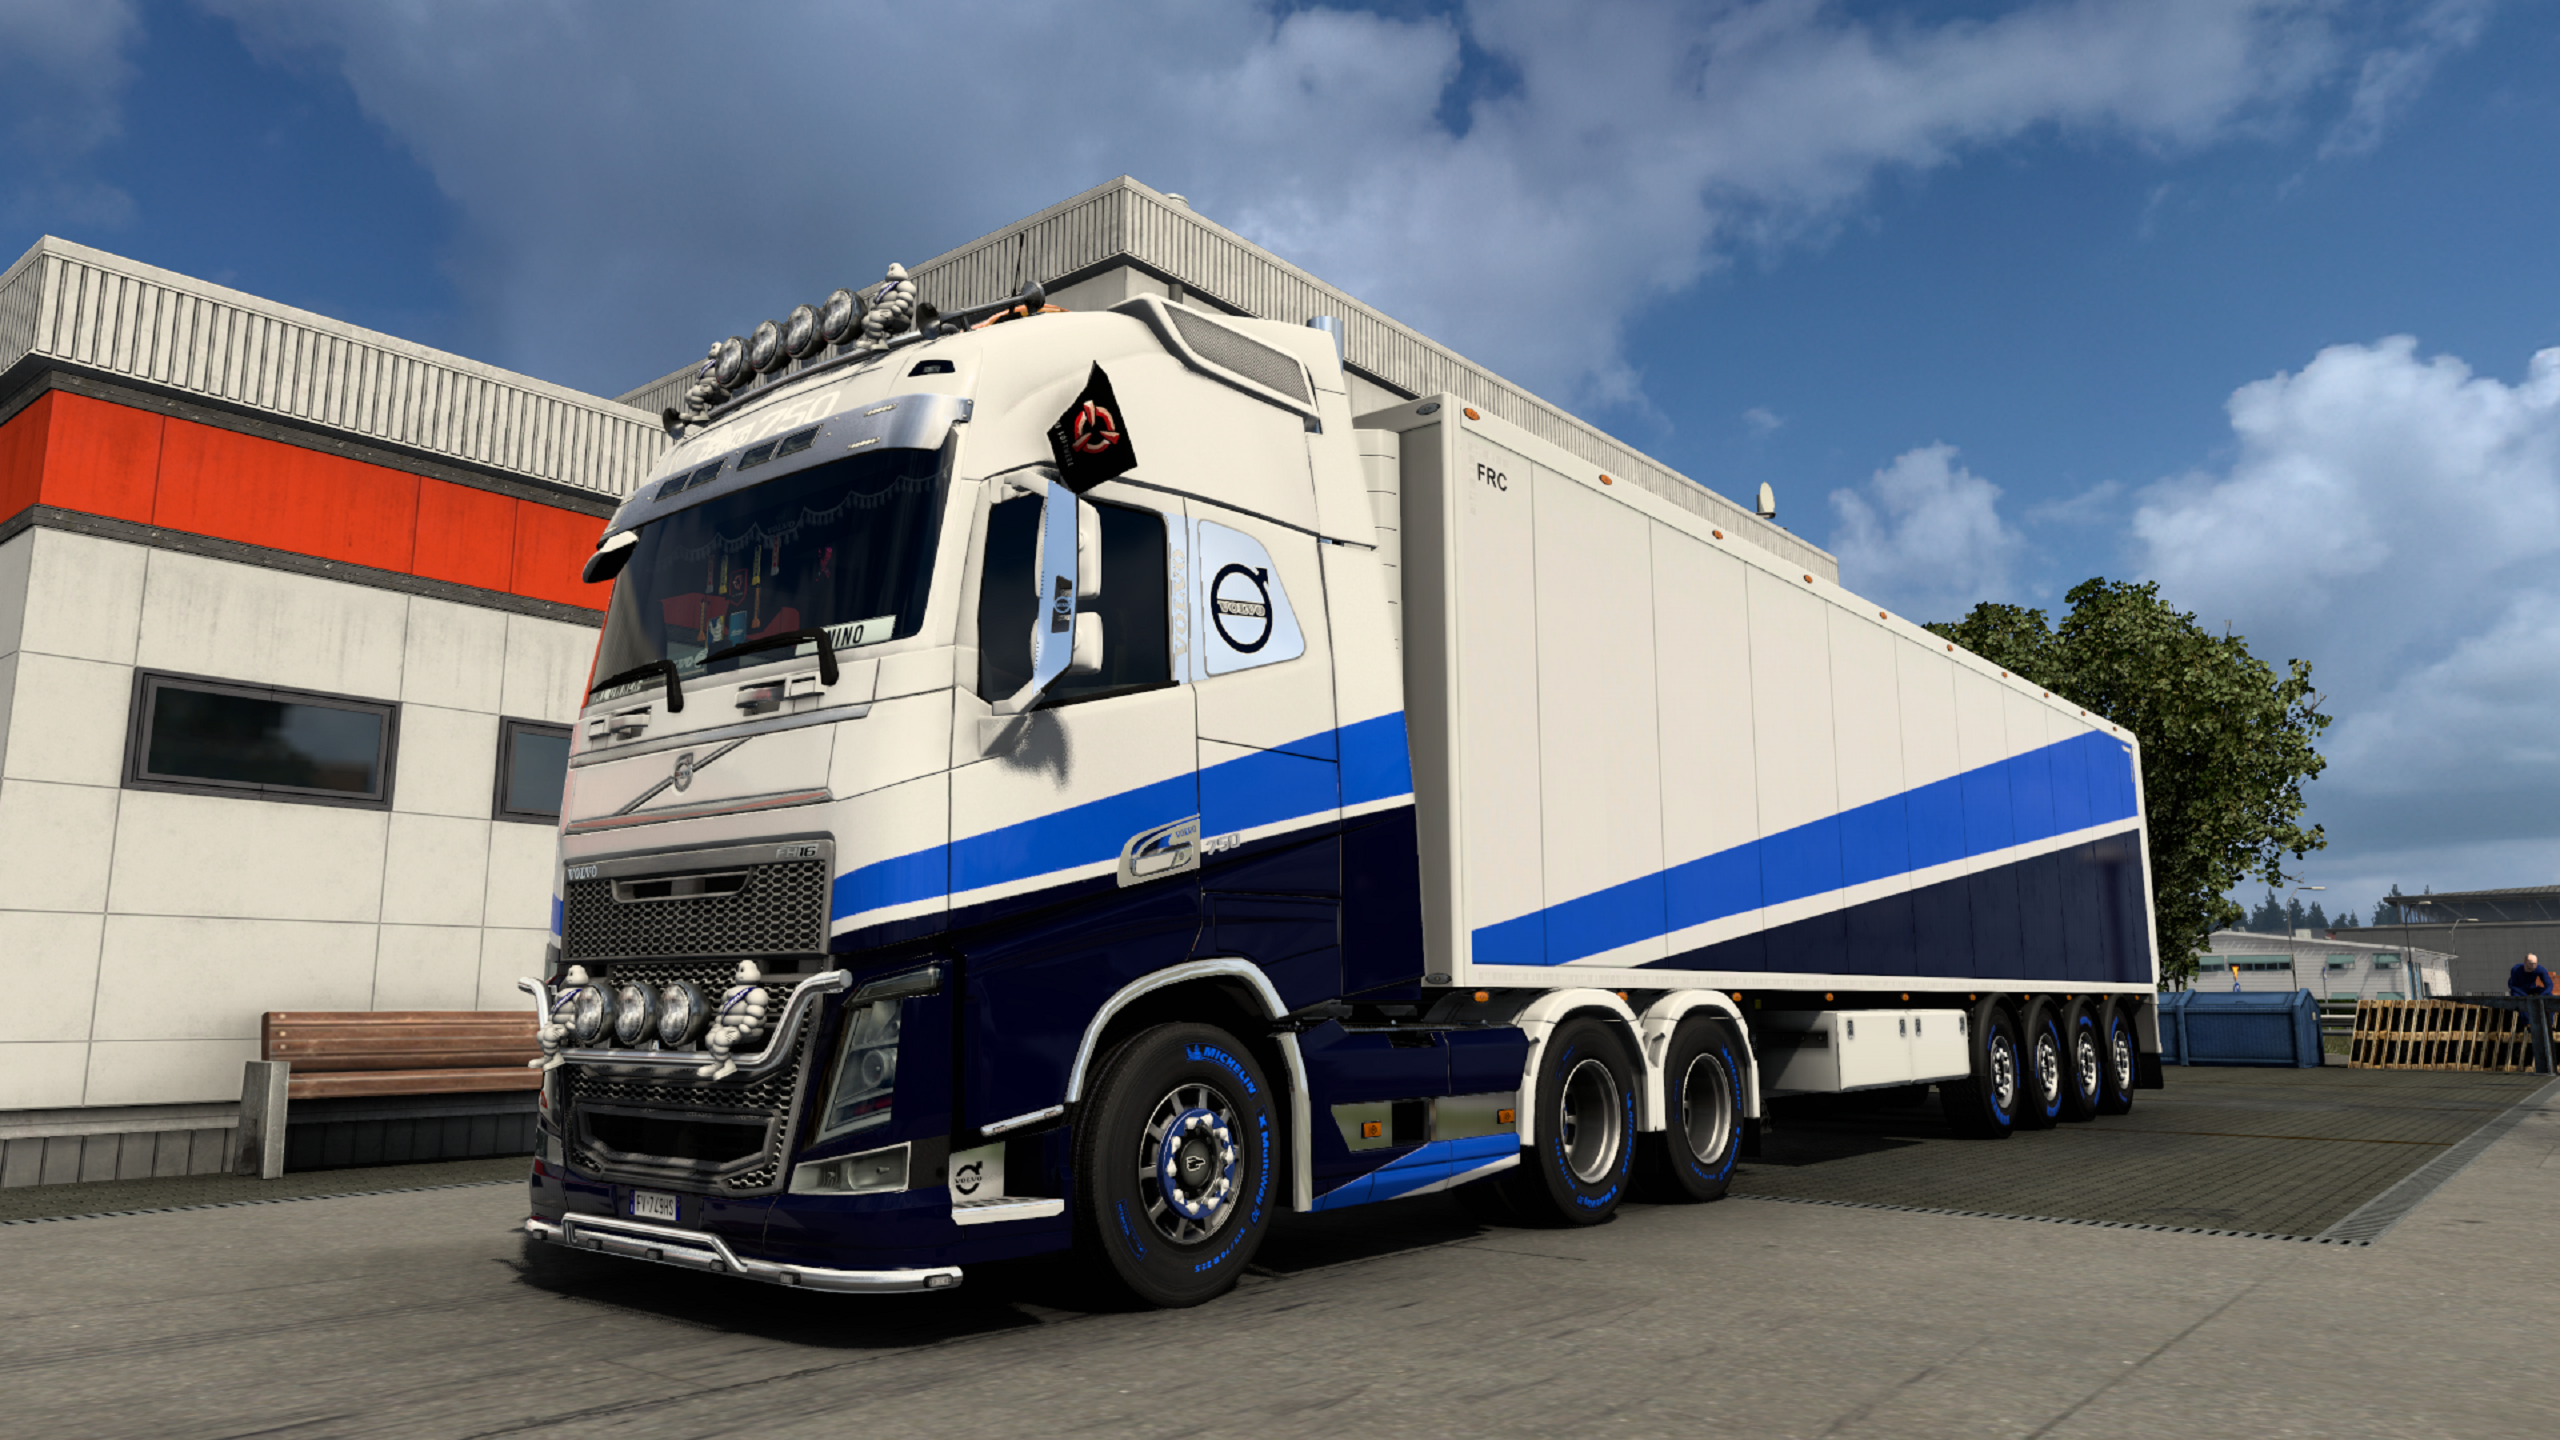 ets2_20210423_151140_00.png